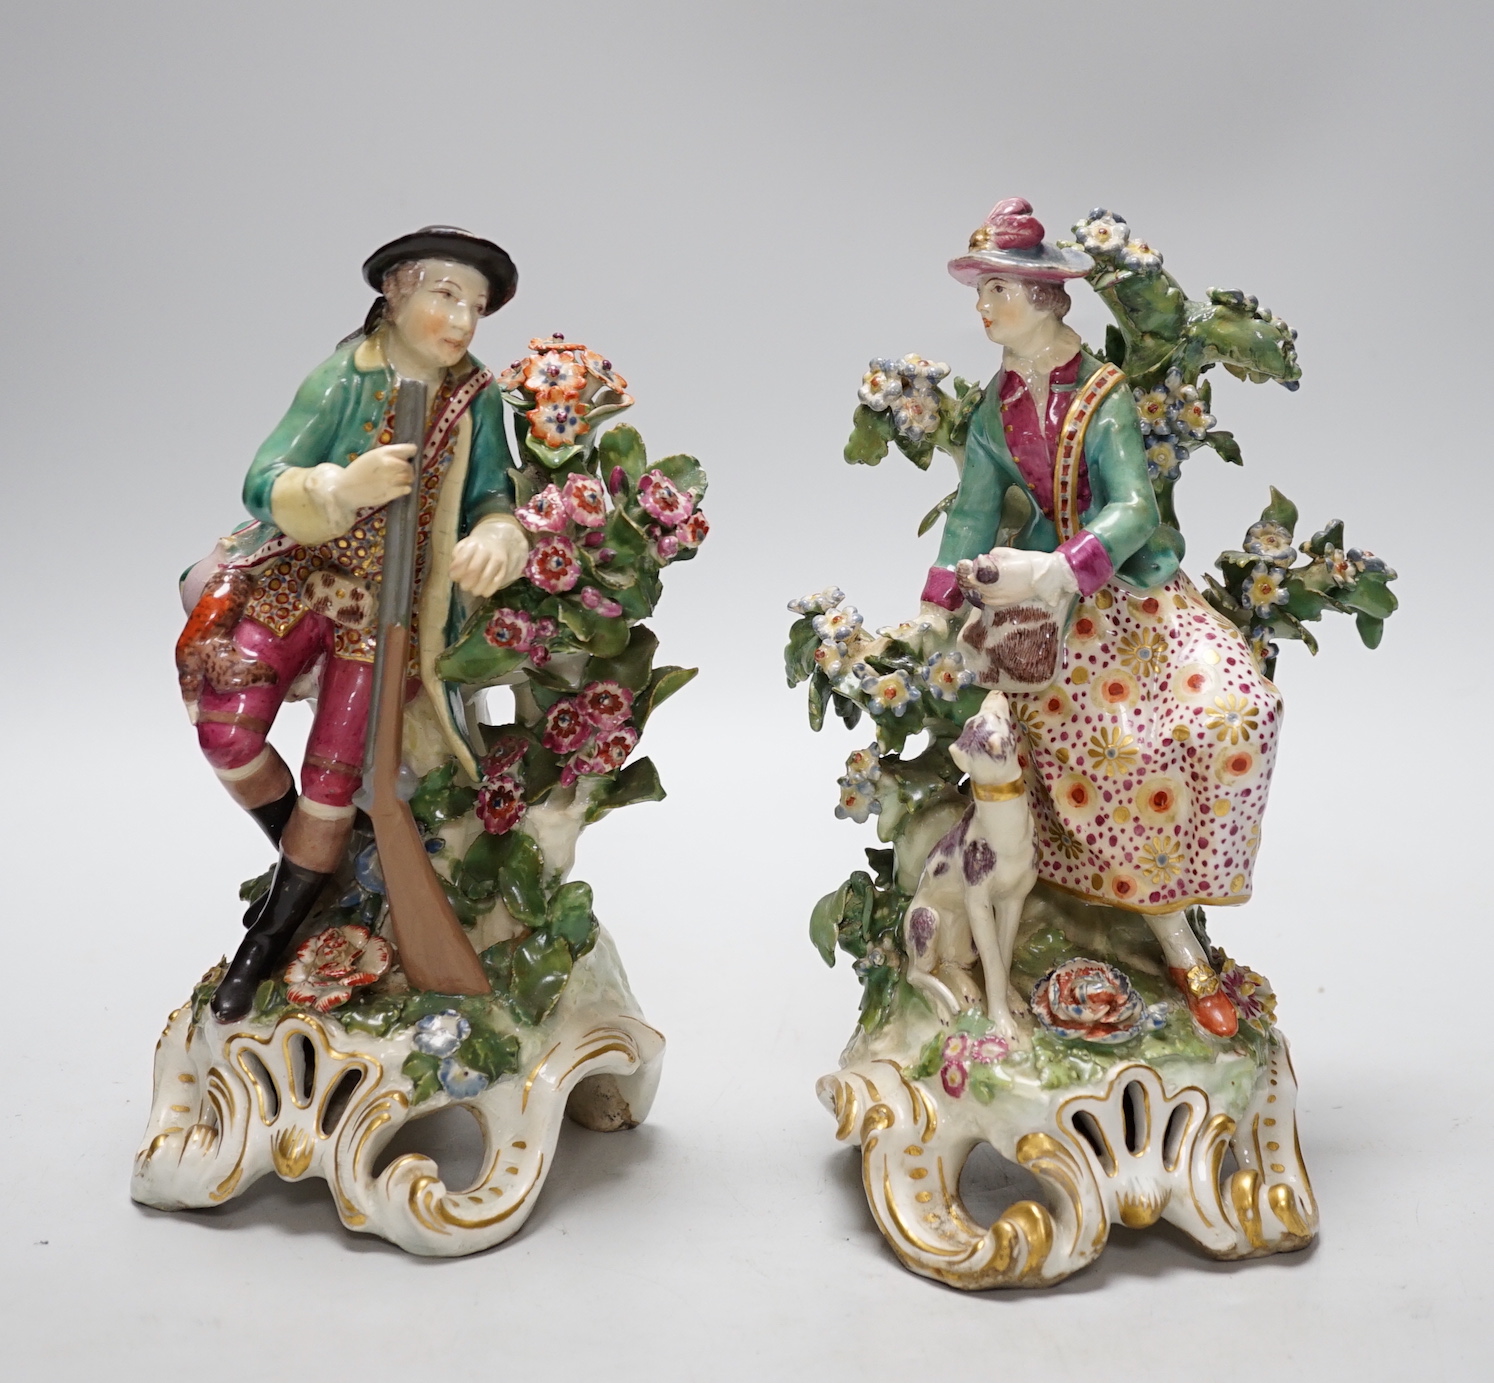 A pair of Chelsea gold anchor period figures wearing 18th century dress, c.1760-65, 22cm